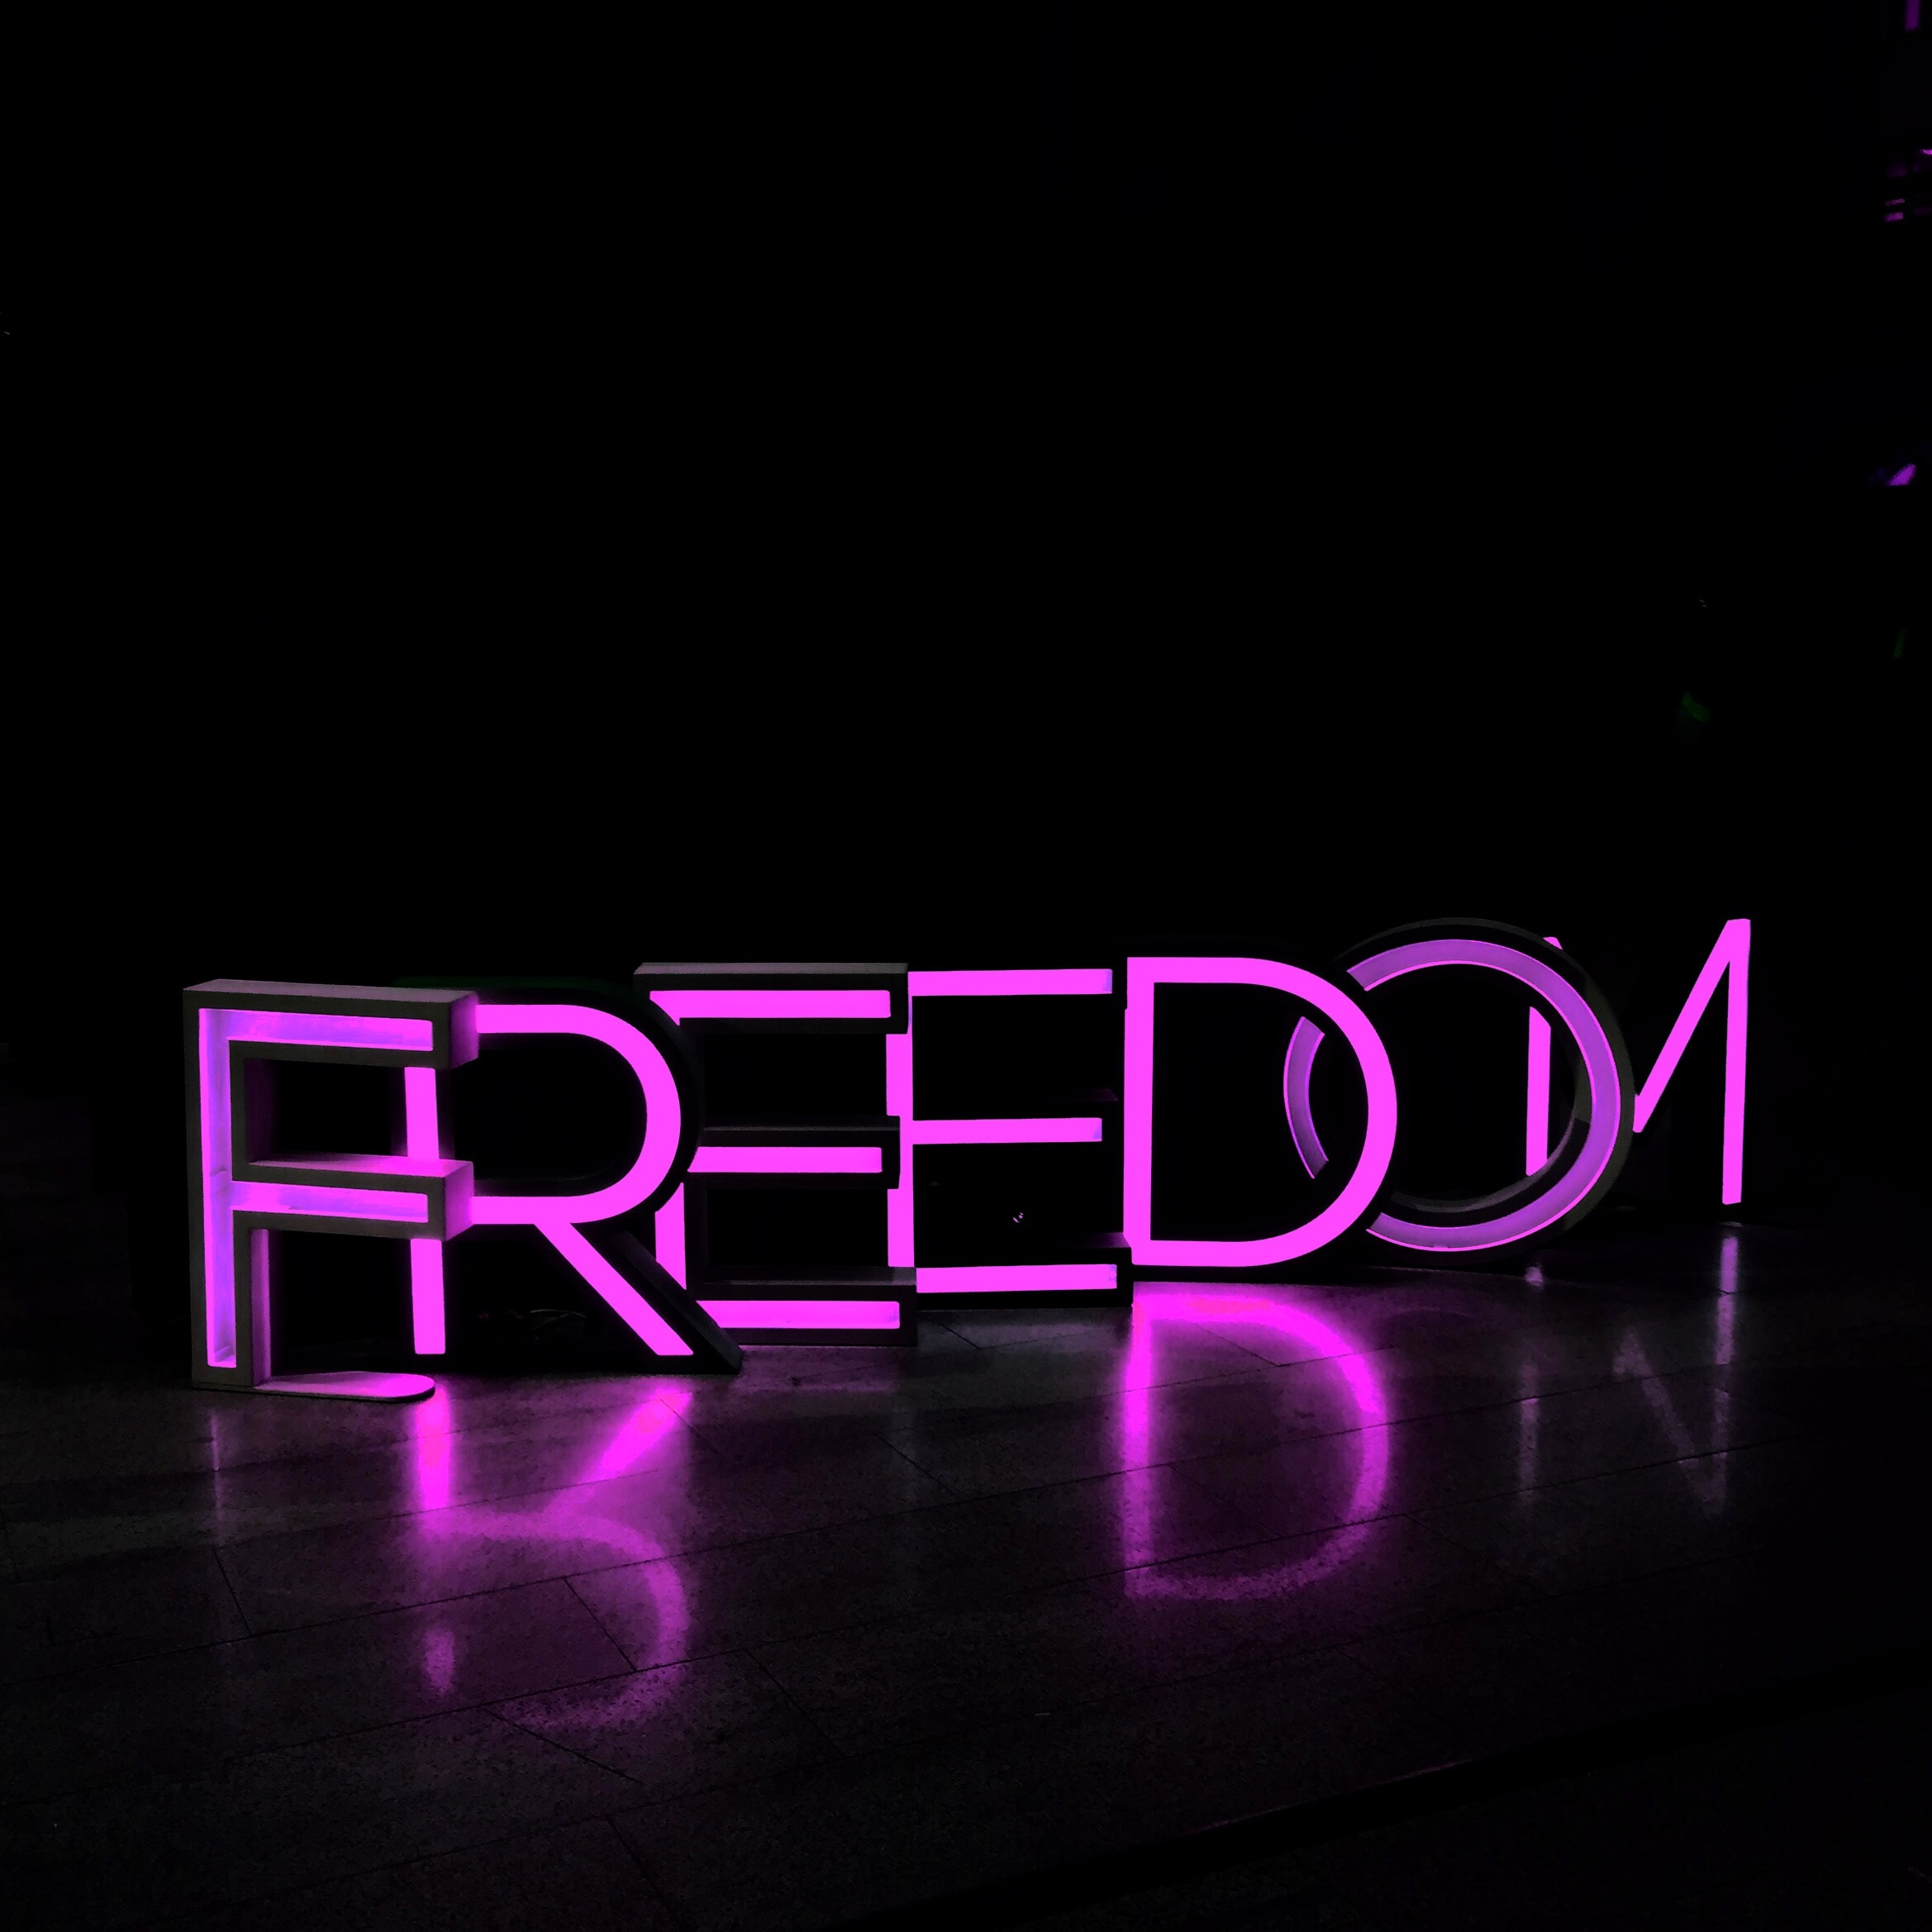 Neon purple light text spelling out FREEDOM.